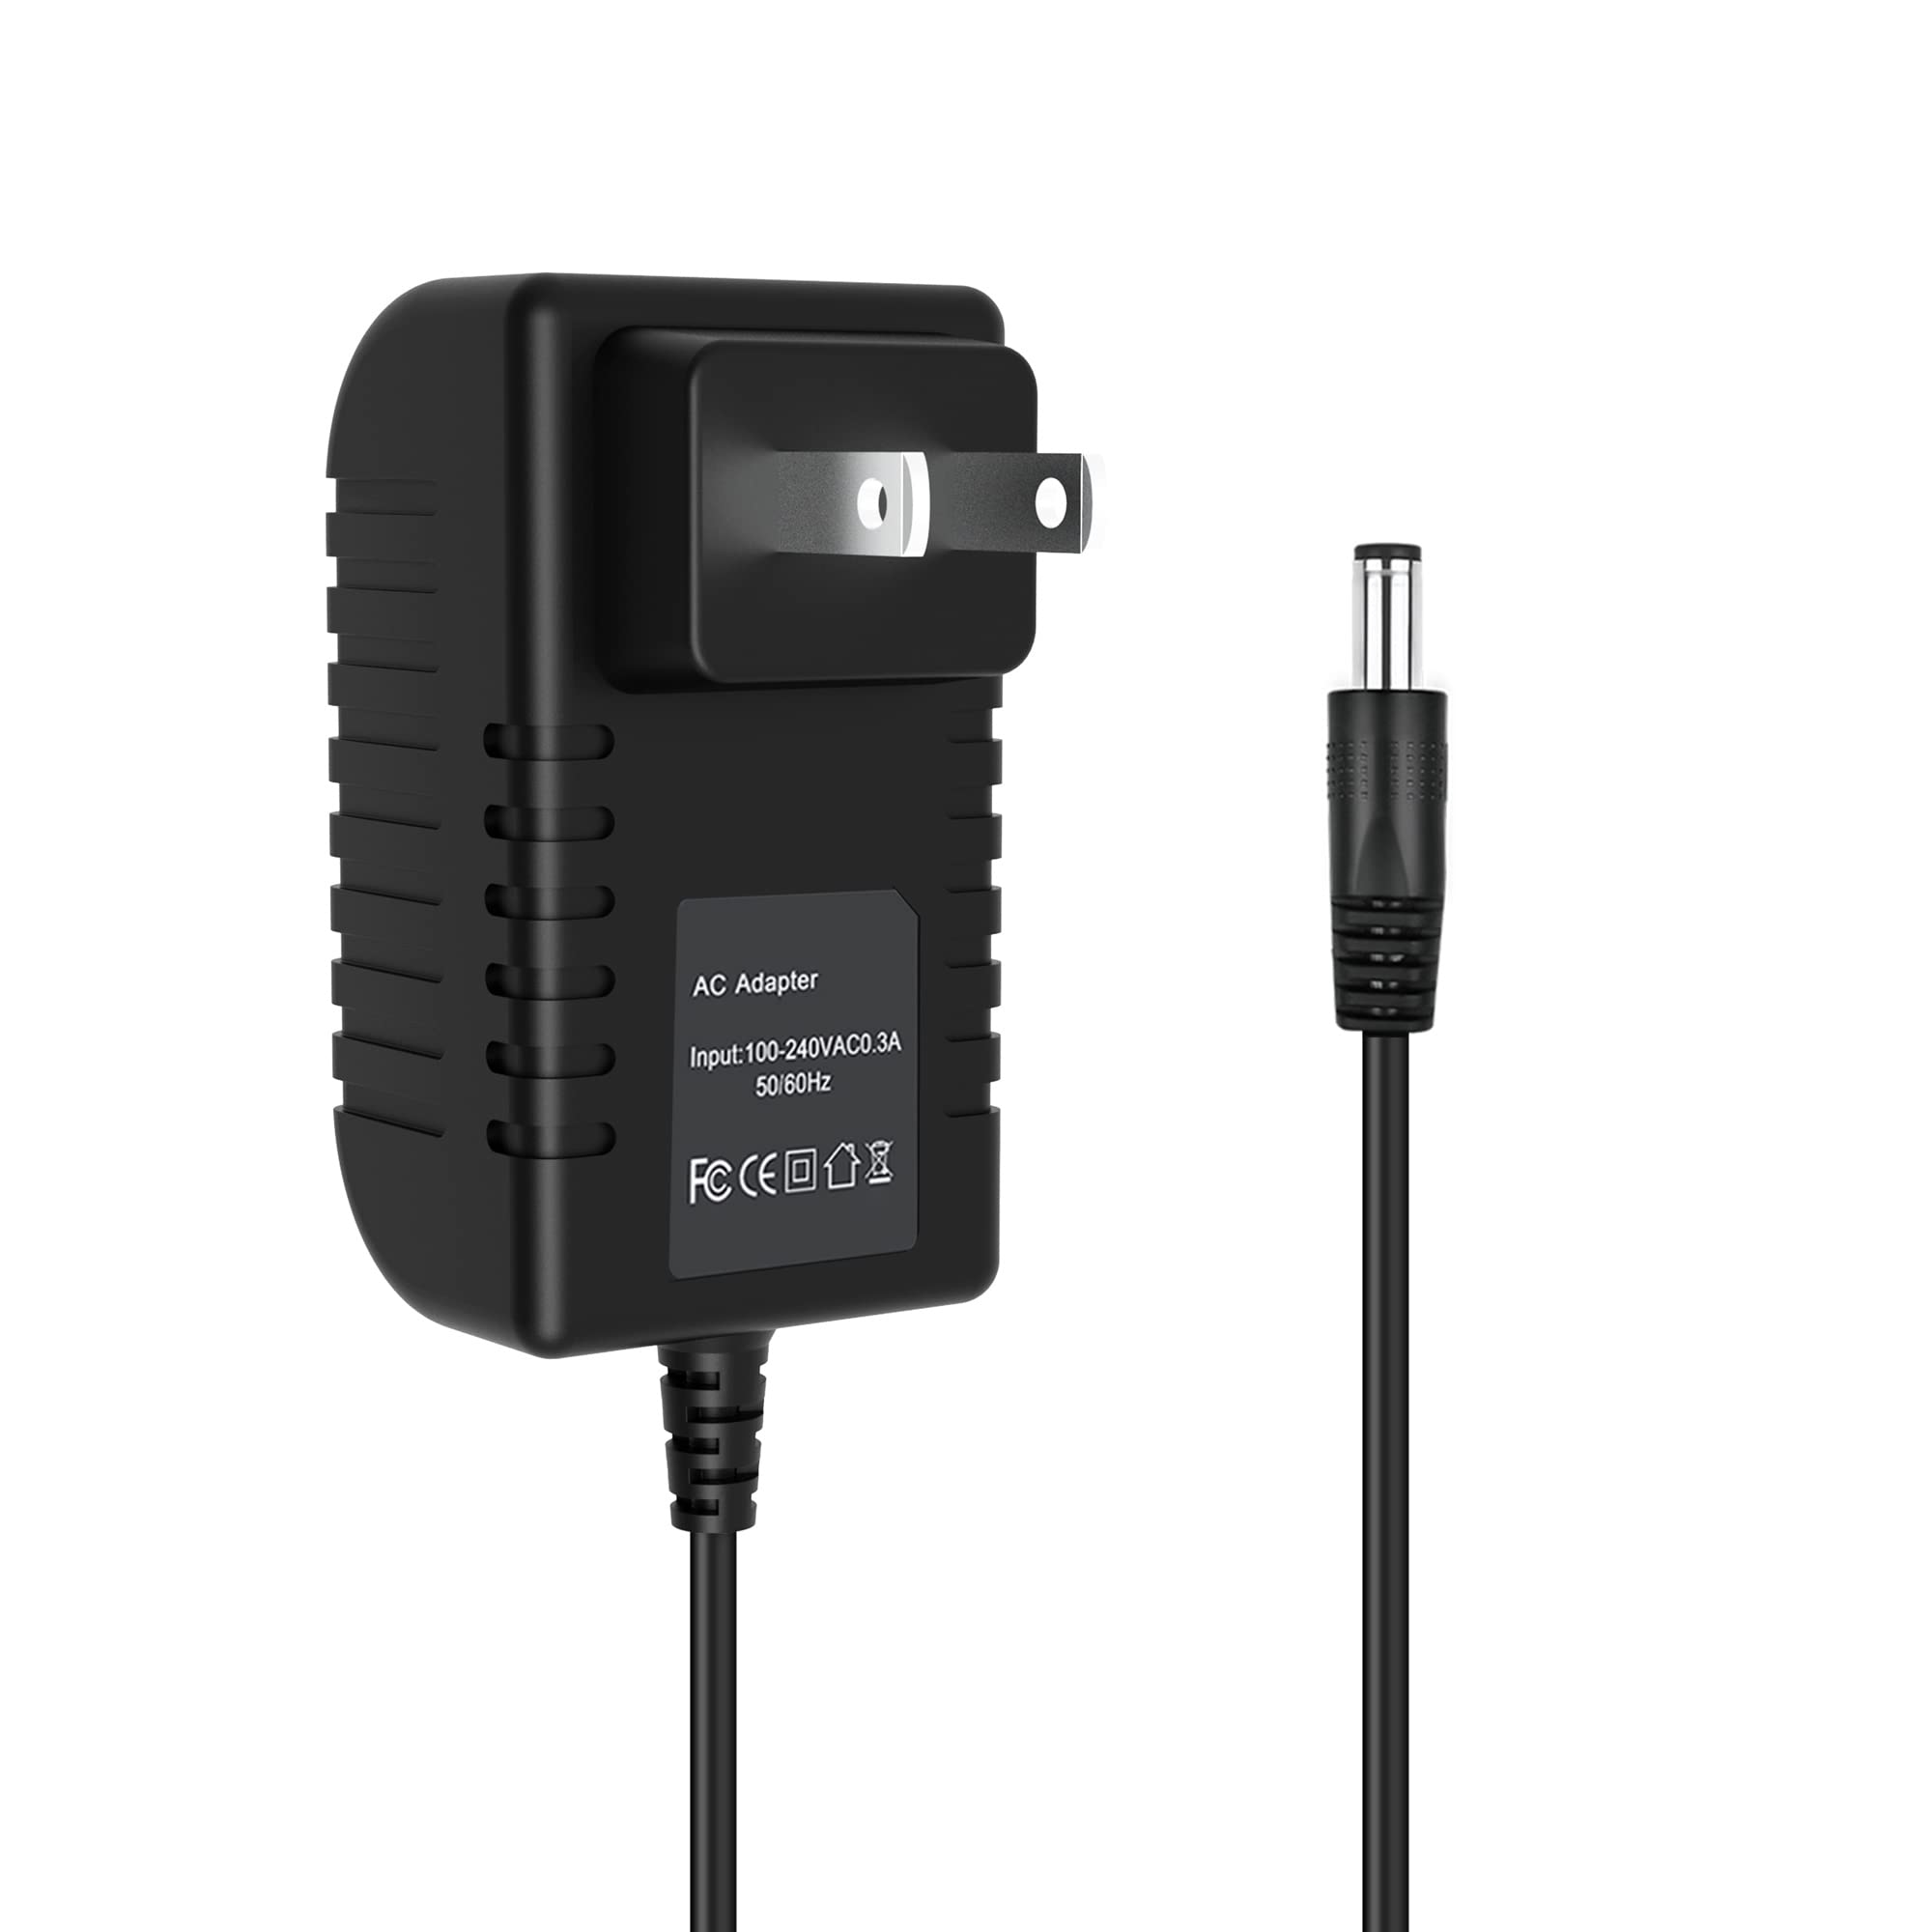 J-ZMQER 12V 2A AC-DC Adapter Compatible with Petsafe Wireless Fence IF-100 Transmitter Power Charger